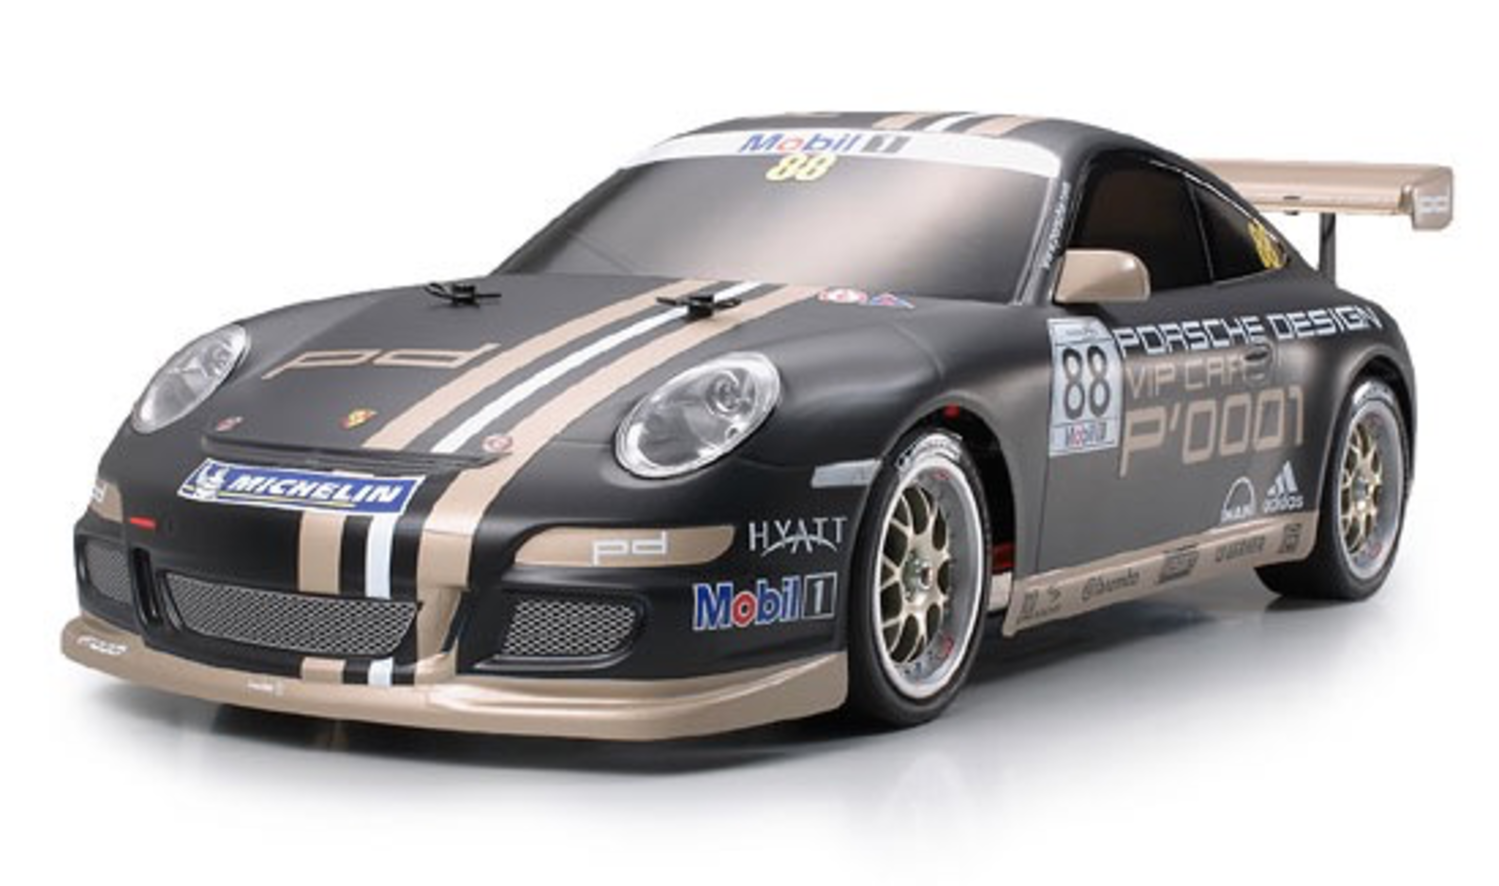 Tamiya Tamiya Porsche 911 Gt3 Cup Vip 07 Tt 01 Type E Chassis 1 10 Scale Kit With Led S Br Includes Teu101 Bk Electronic Speed Controllerincludes Teu101 Bk Electronic Speed Controller Acercmodels